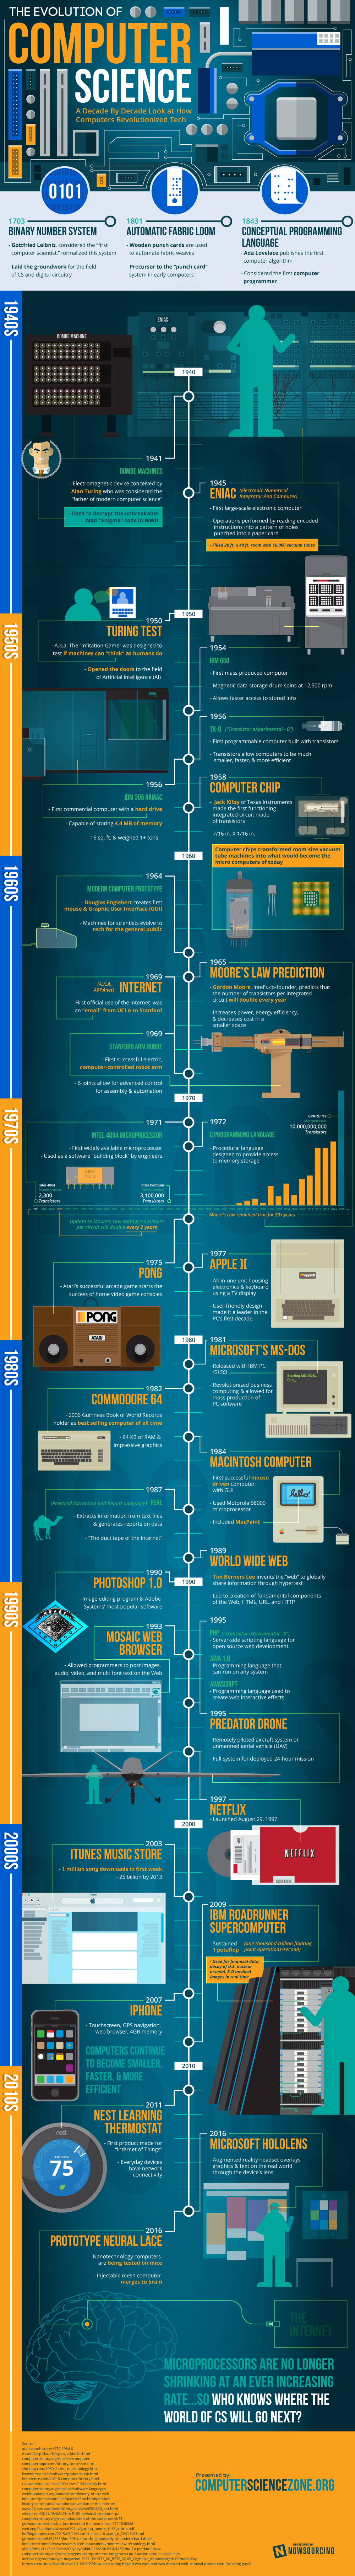 How To Make An Infographic On Computer Science